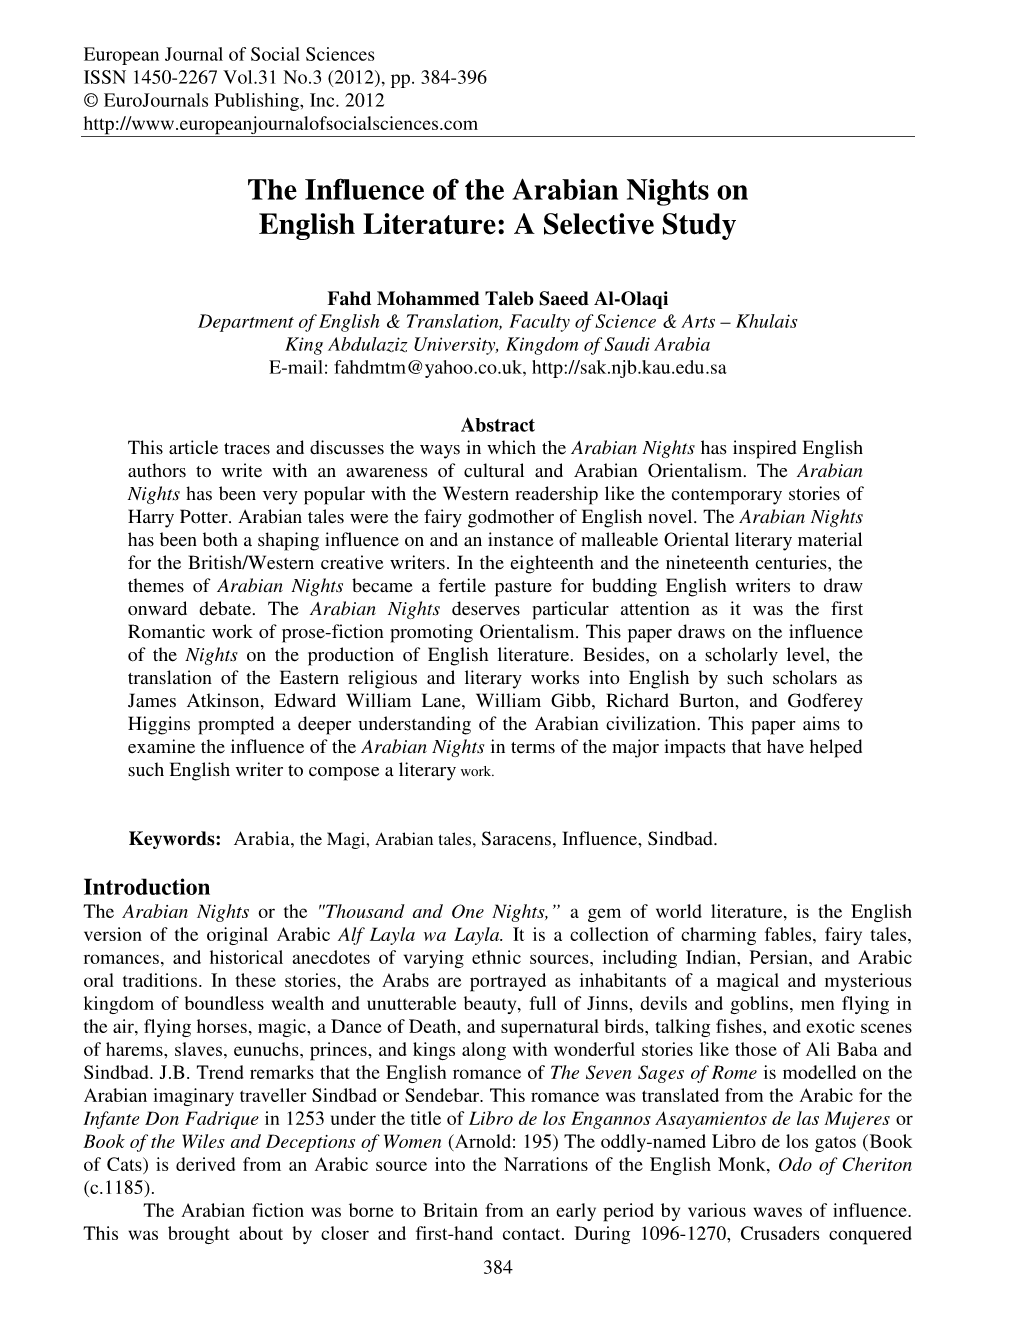 The Influence of the Arabian Nights on English Literature: a Selective Study